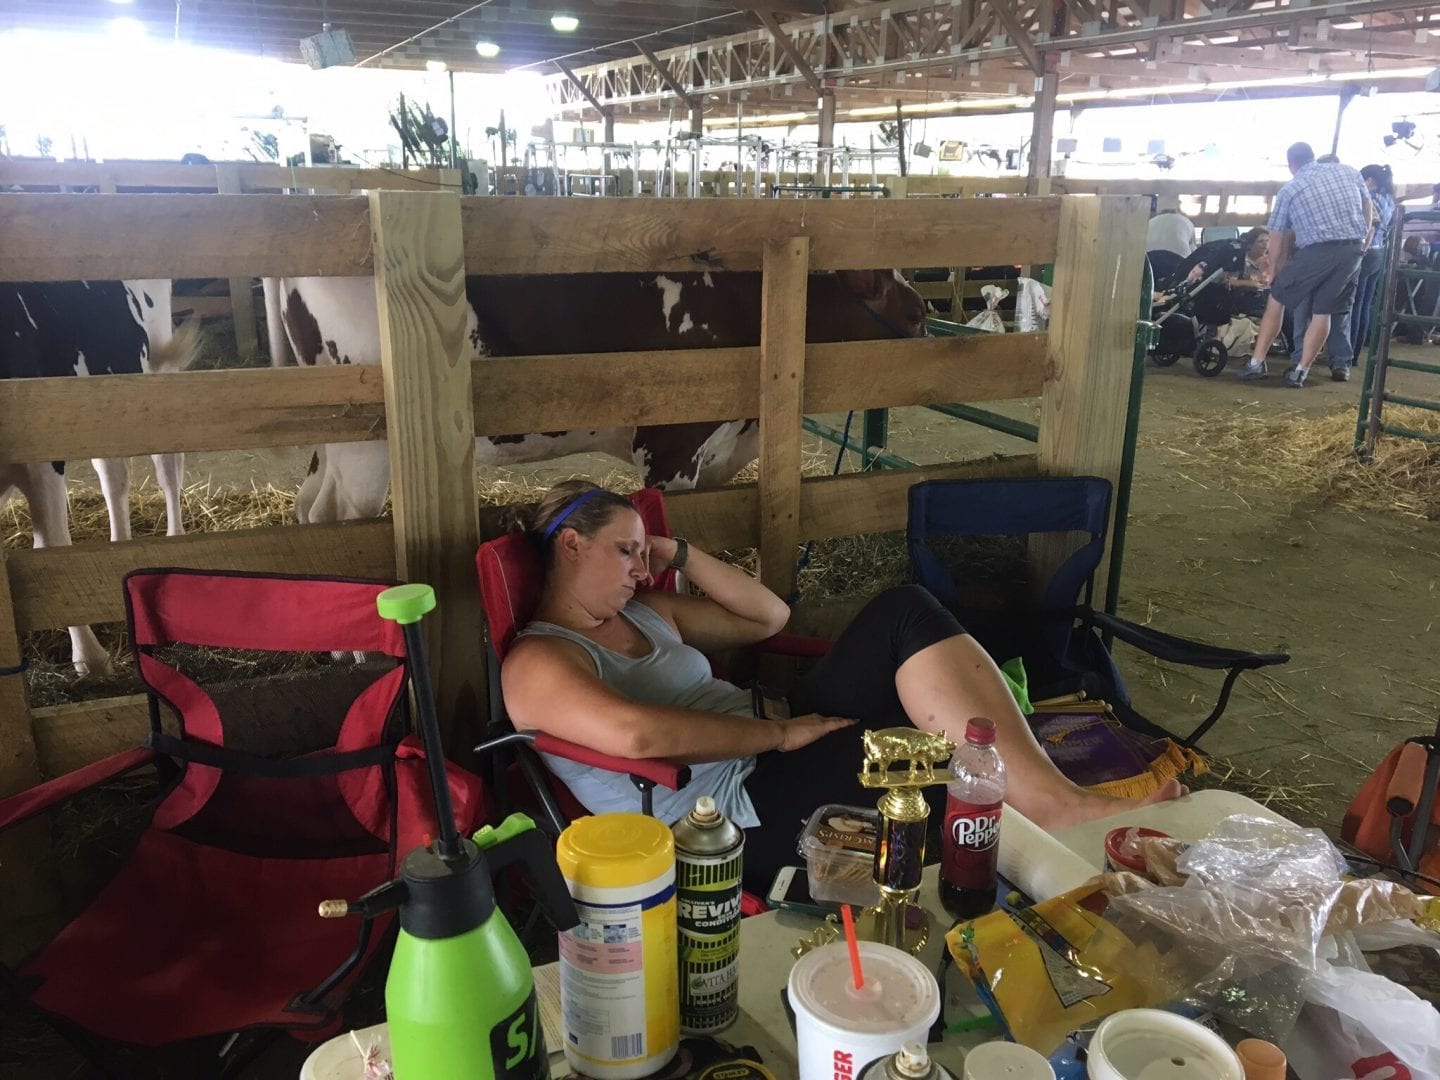 What you need to have at a livestock show or county fair?